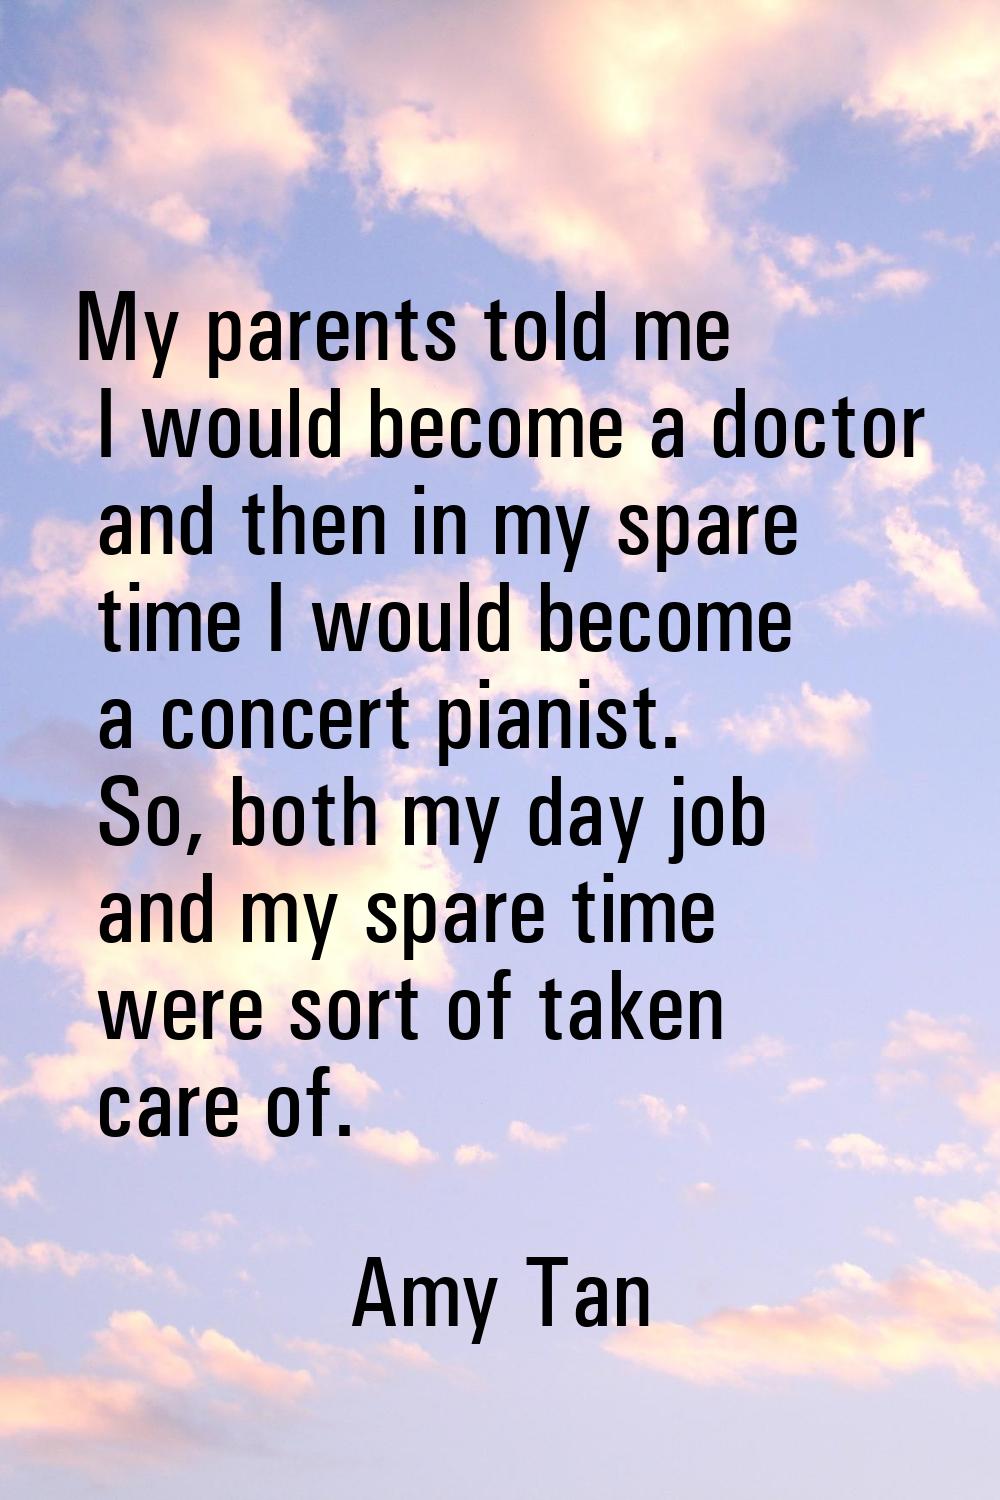 My parents told me I would become a doctor and then in my spare time I would become a concert piani